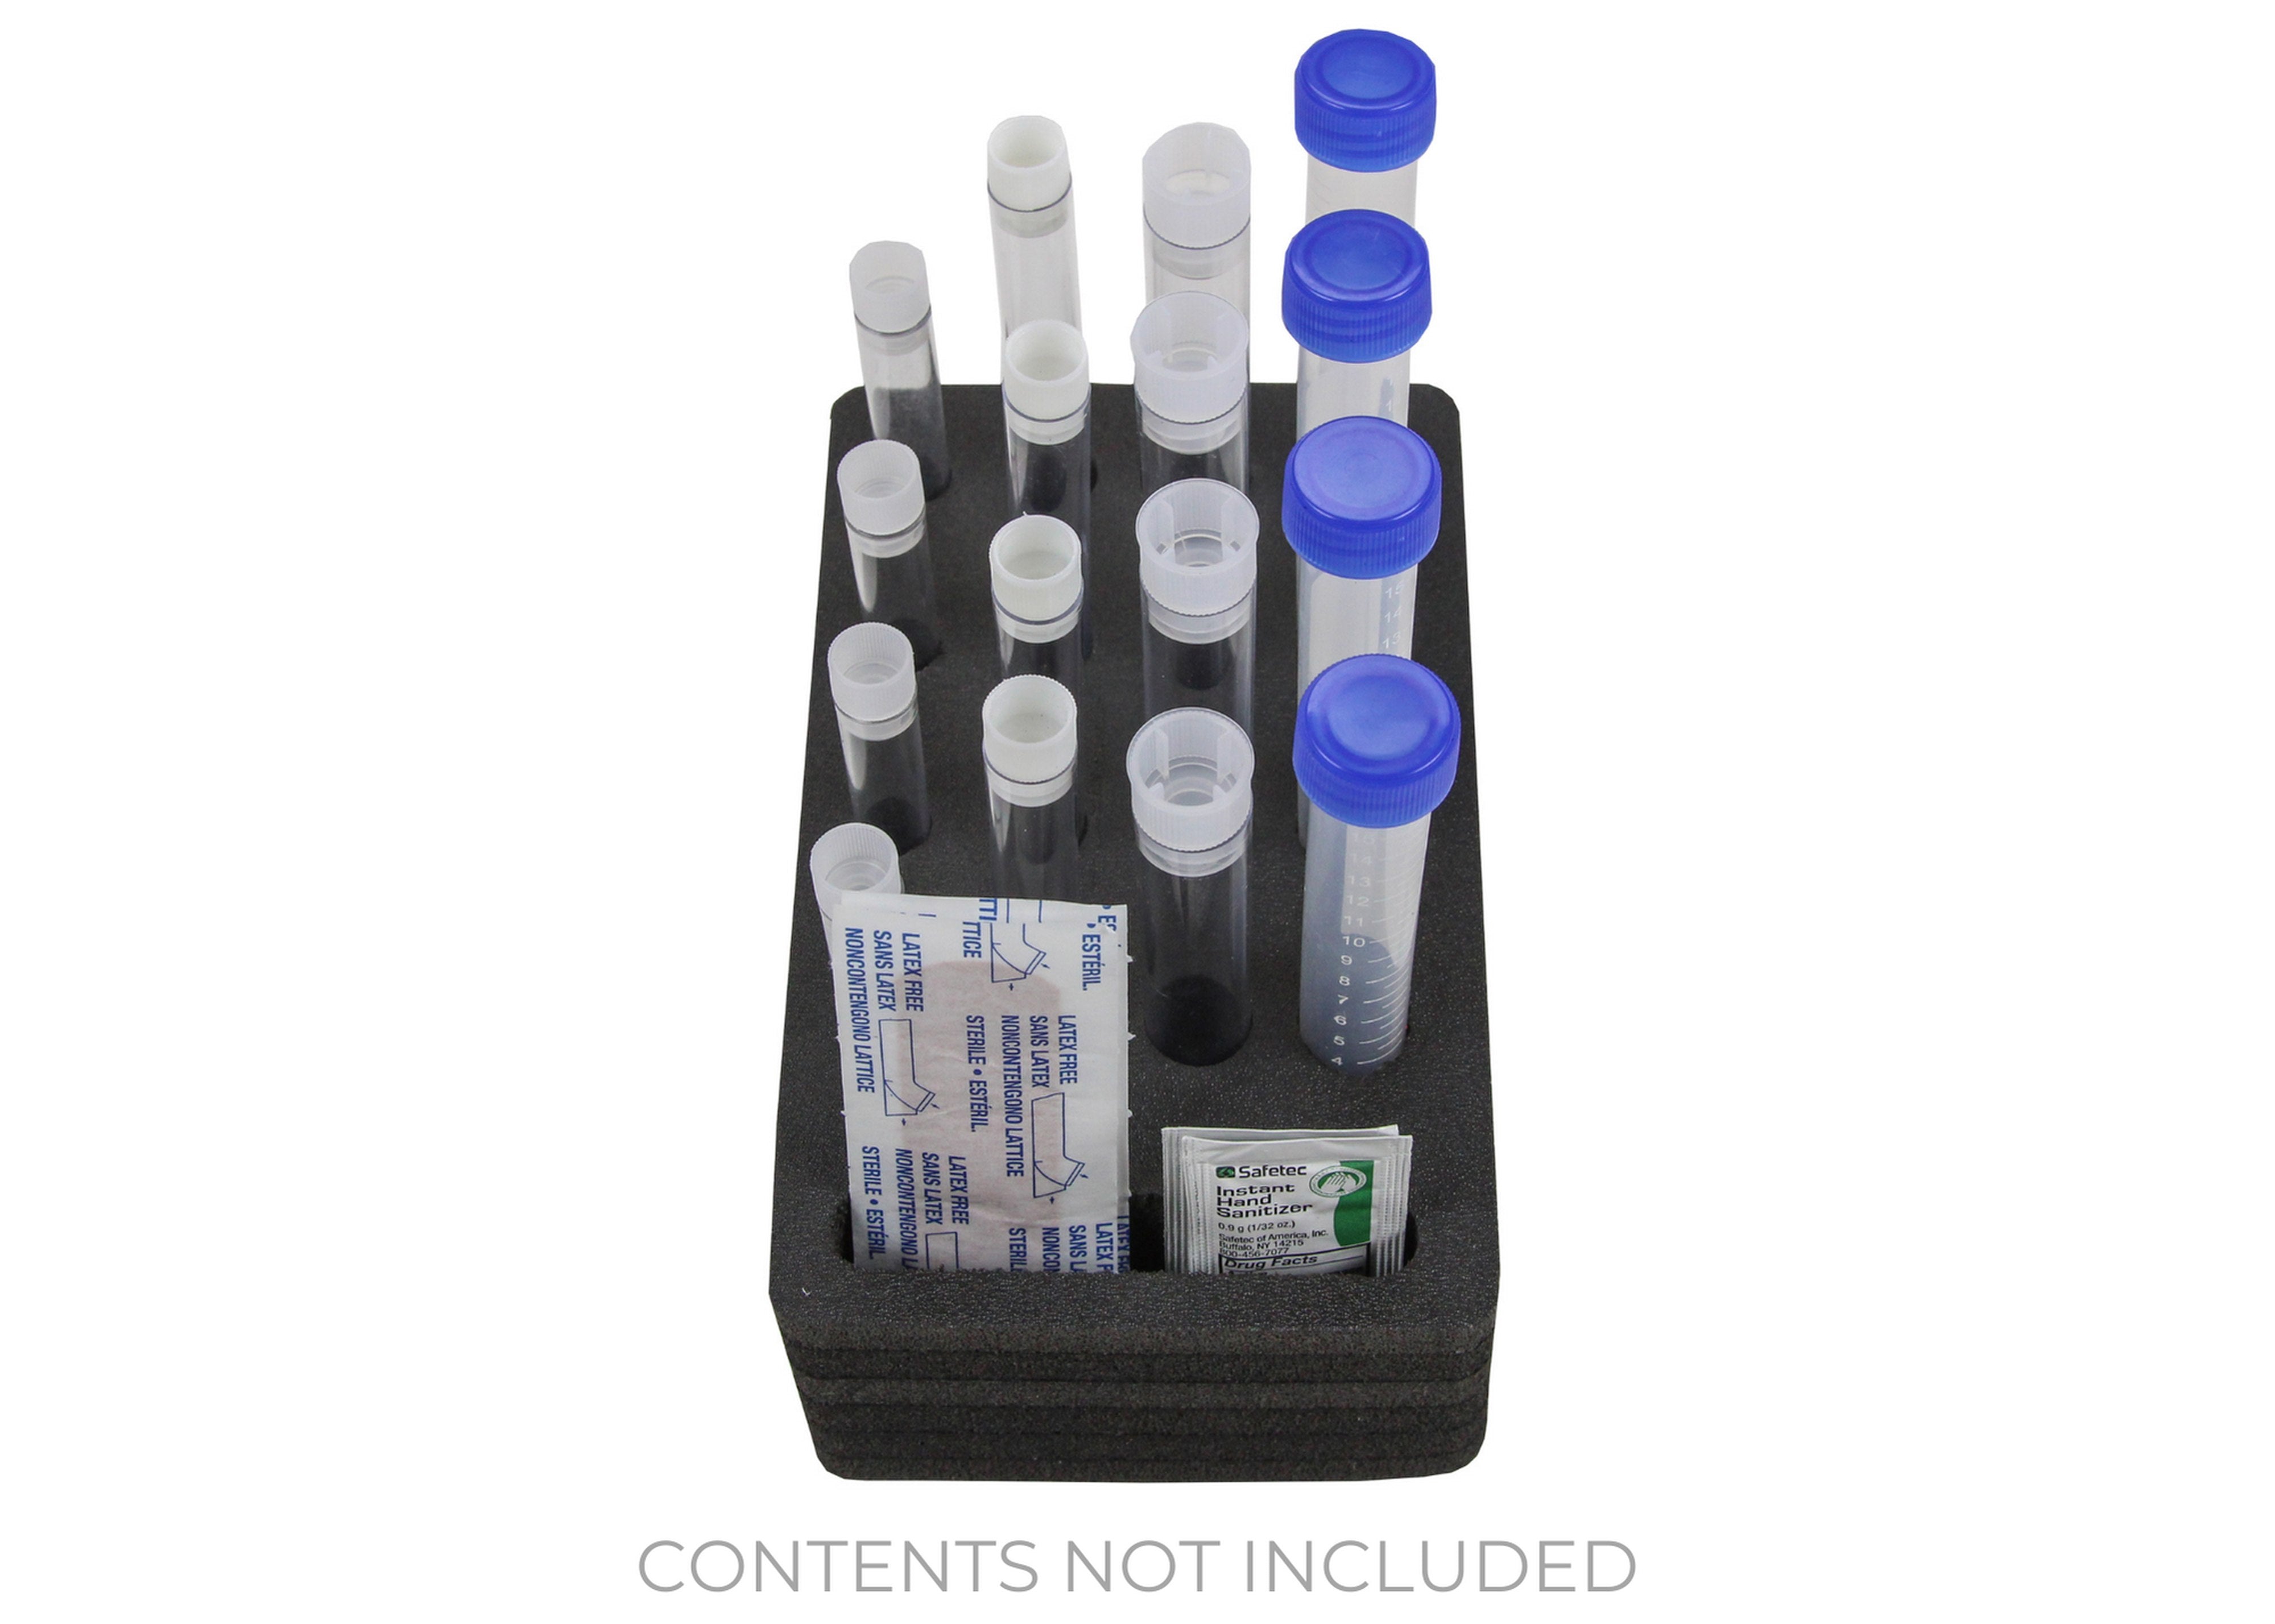 Personal Travel Test Tube Holder Rack Foam Lab Storage Supplies Compact Mini St Transport Holds 16 Tubes Fits up to 11mm 13mm 15mm 17mm Diameter